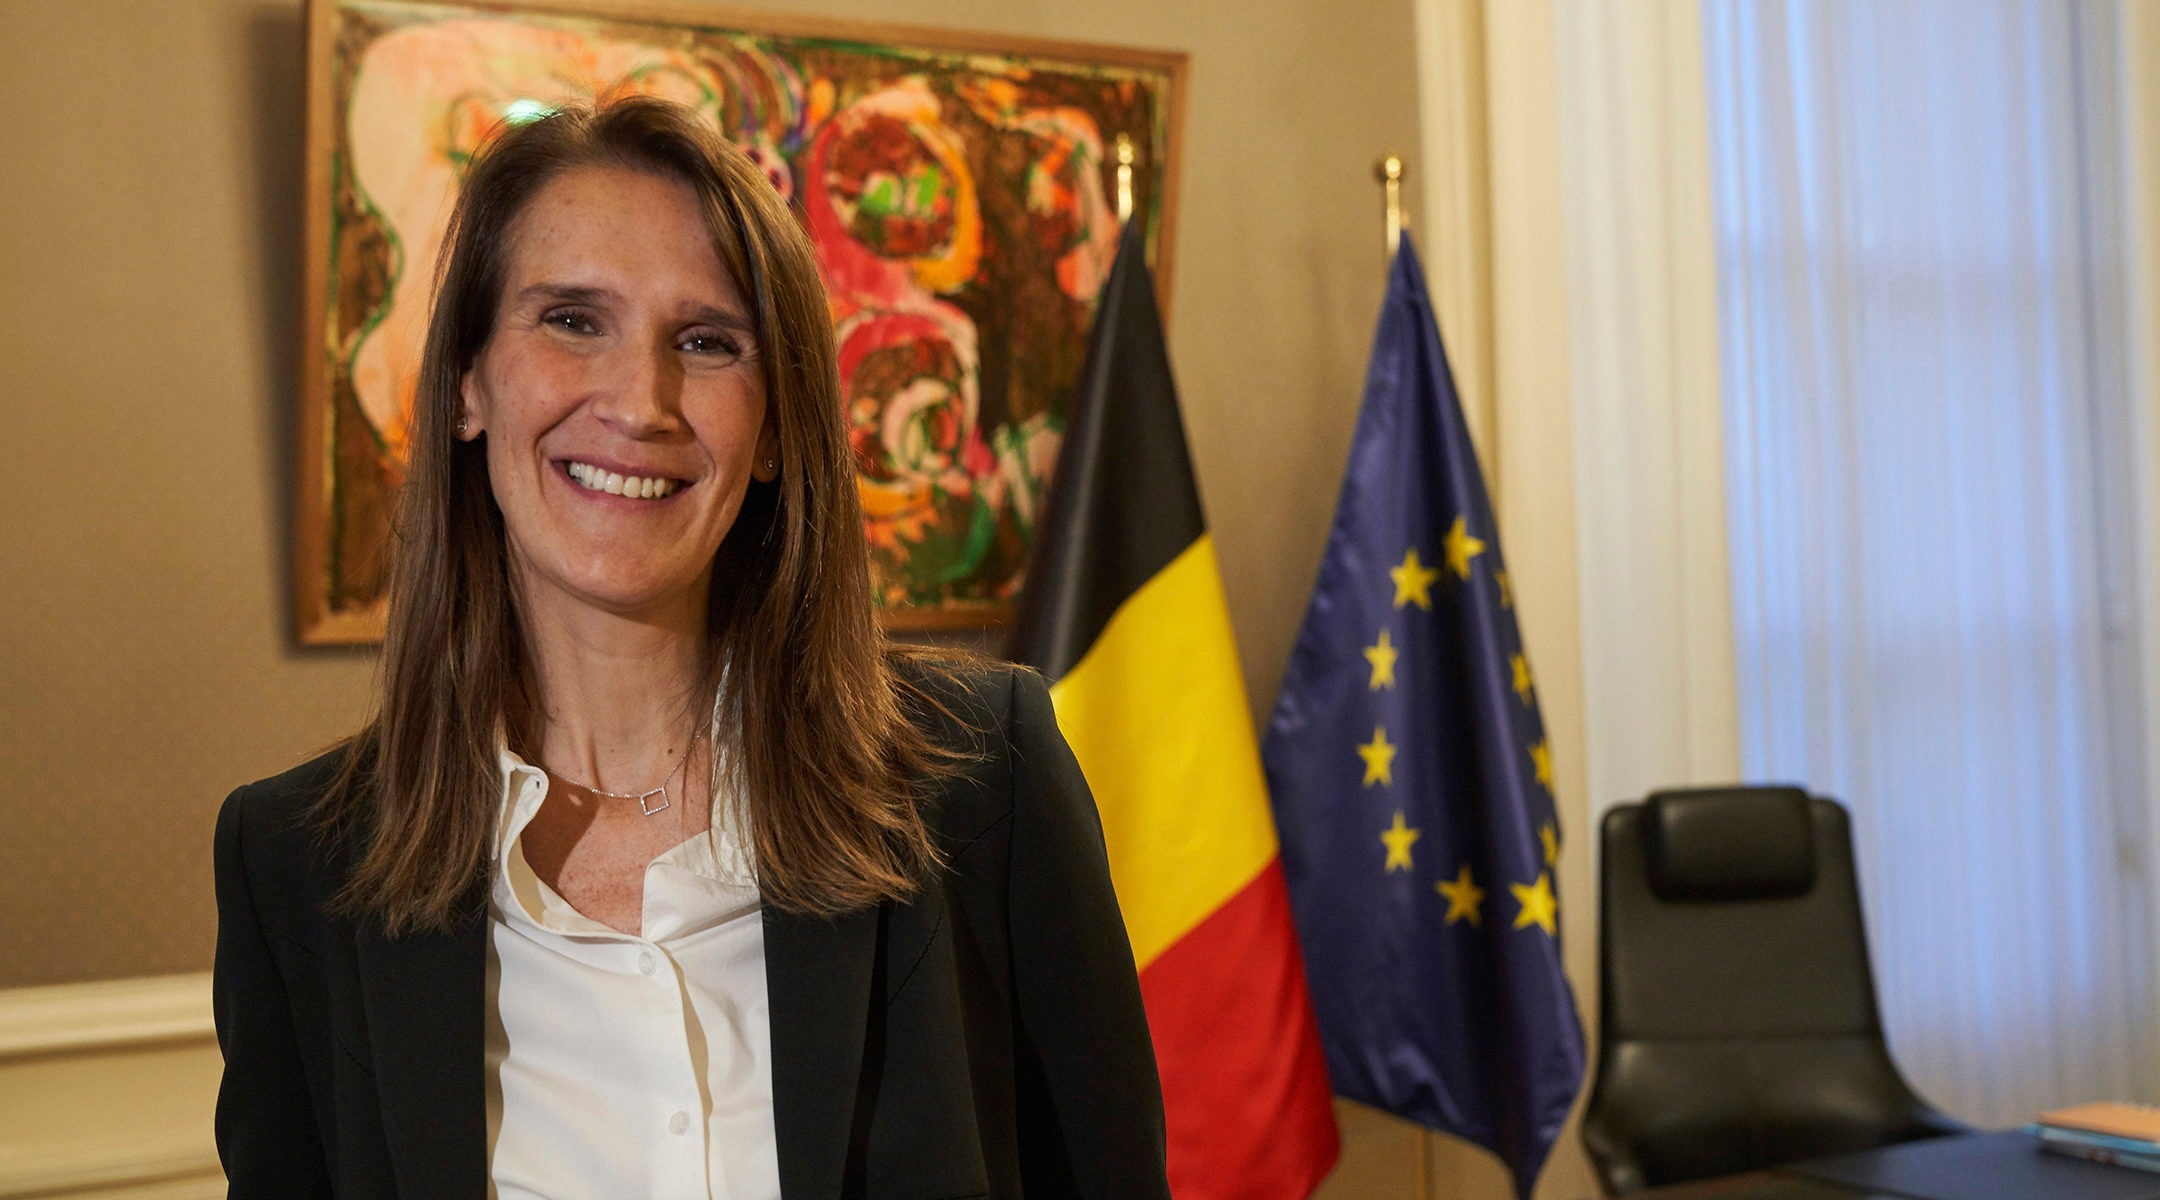 Belgian Prime Minister Sophie Wilmes at her office in Brussels on Oct. 27, 2019. (Vincent Duterne/Getty Images)